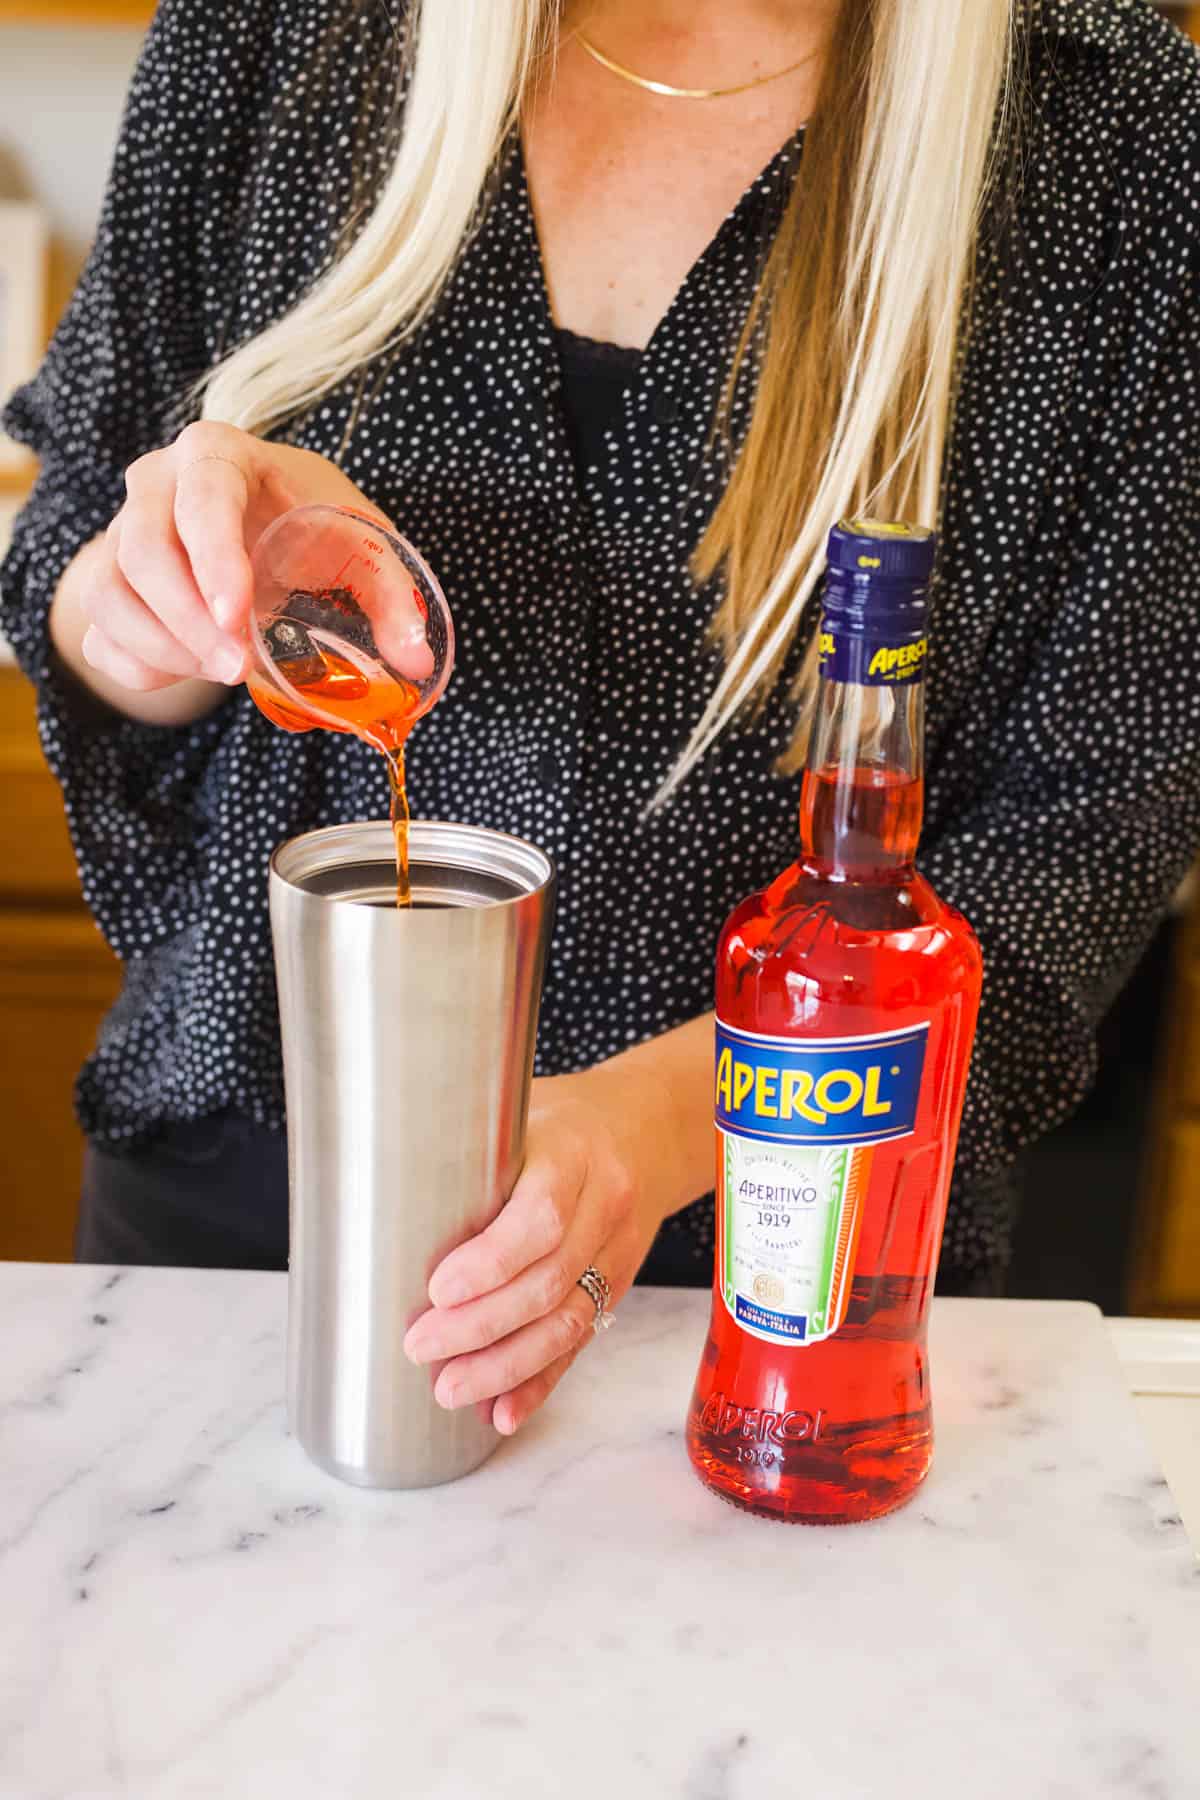 A woman adding Aperol to a cocktail shaker next to a large bottle of Aperol liqueur.